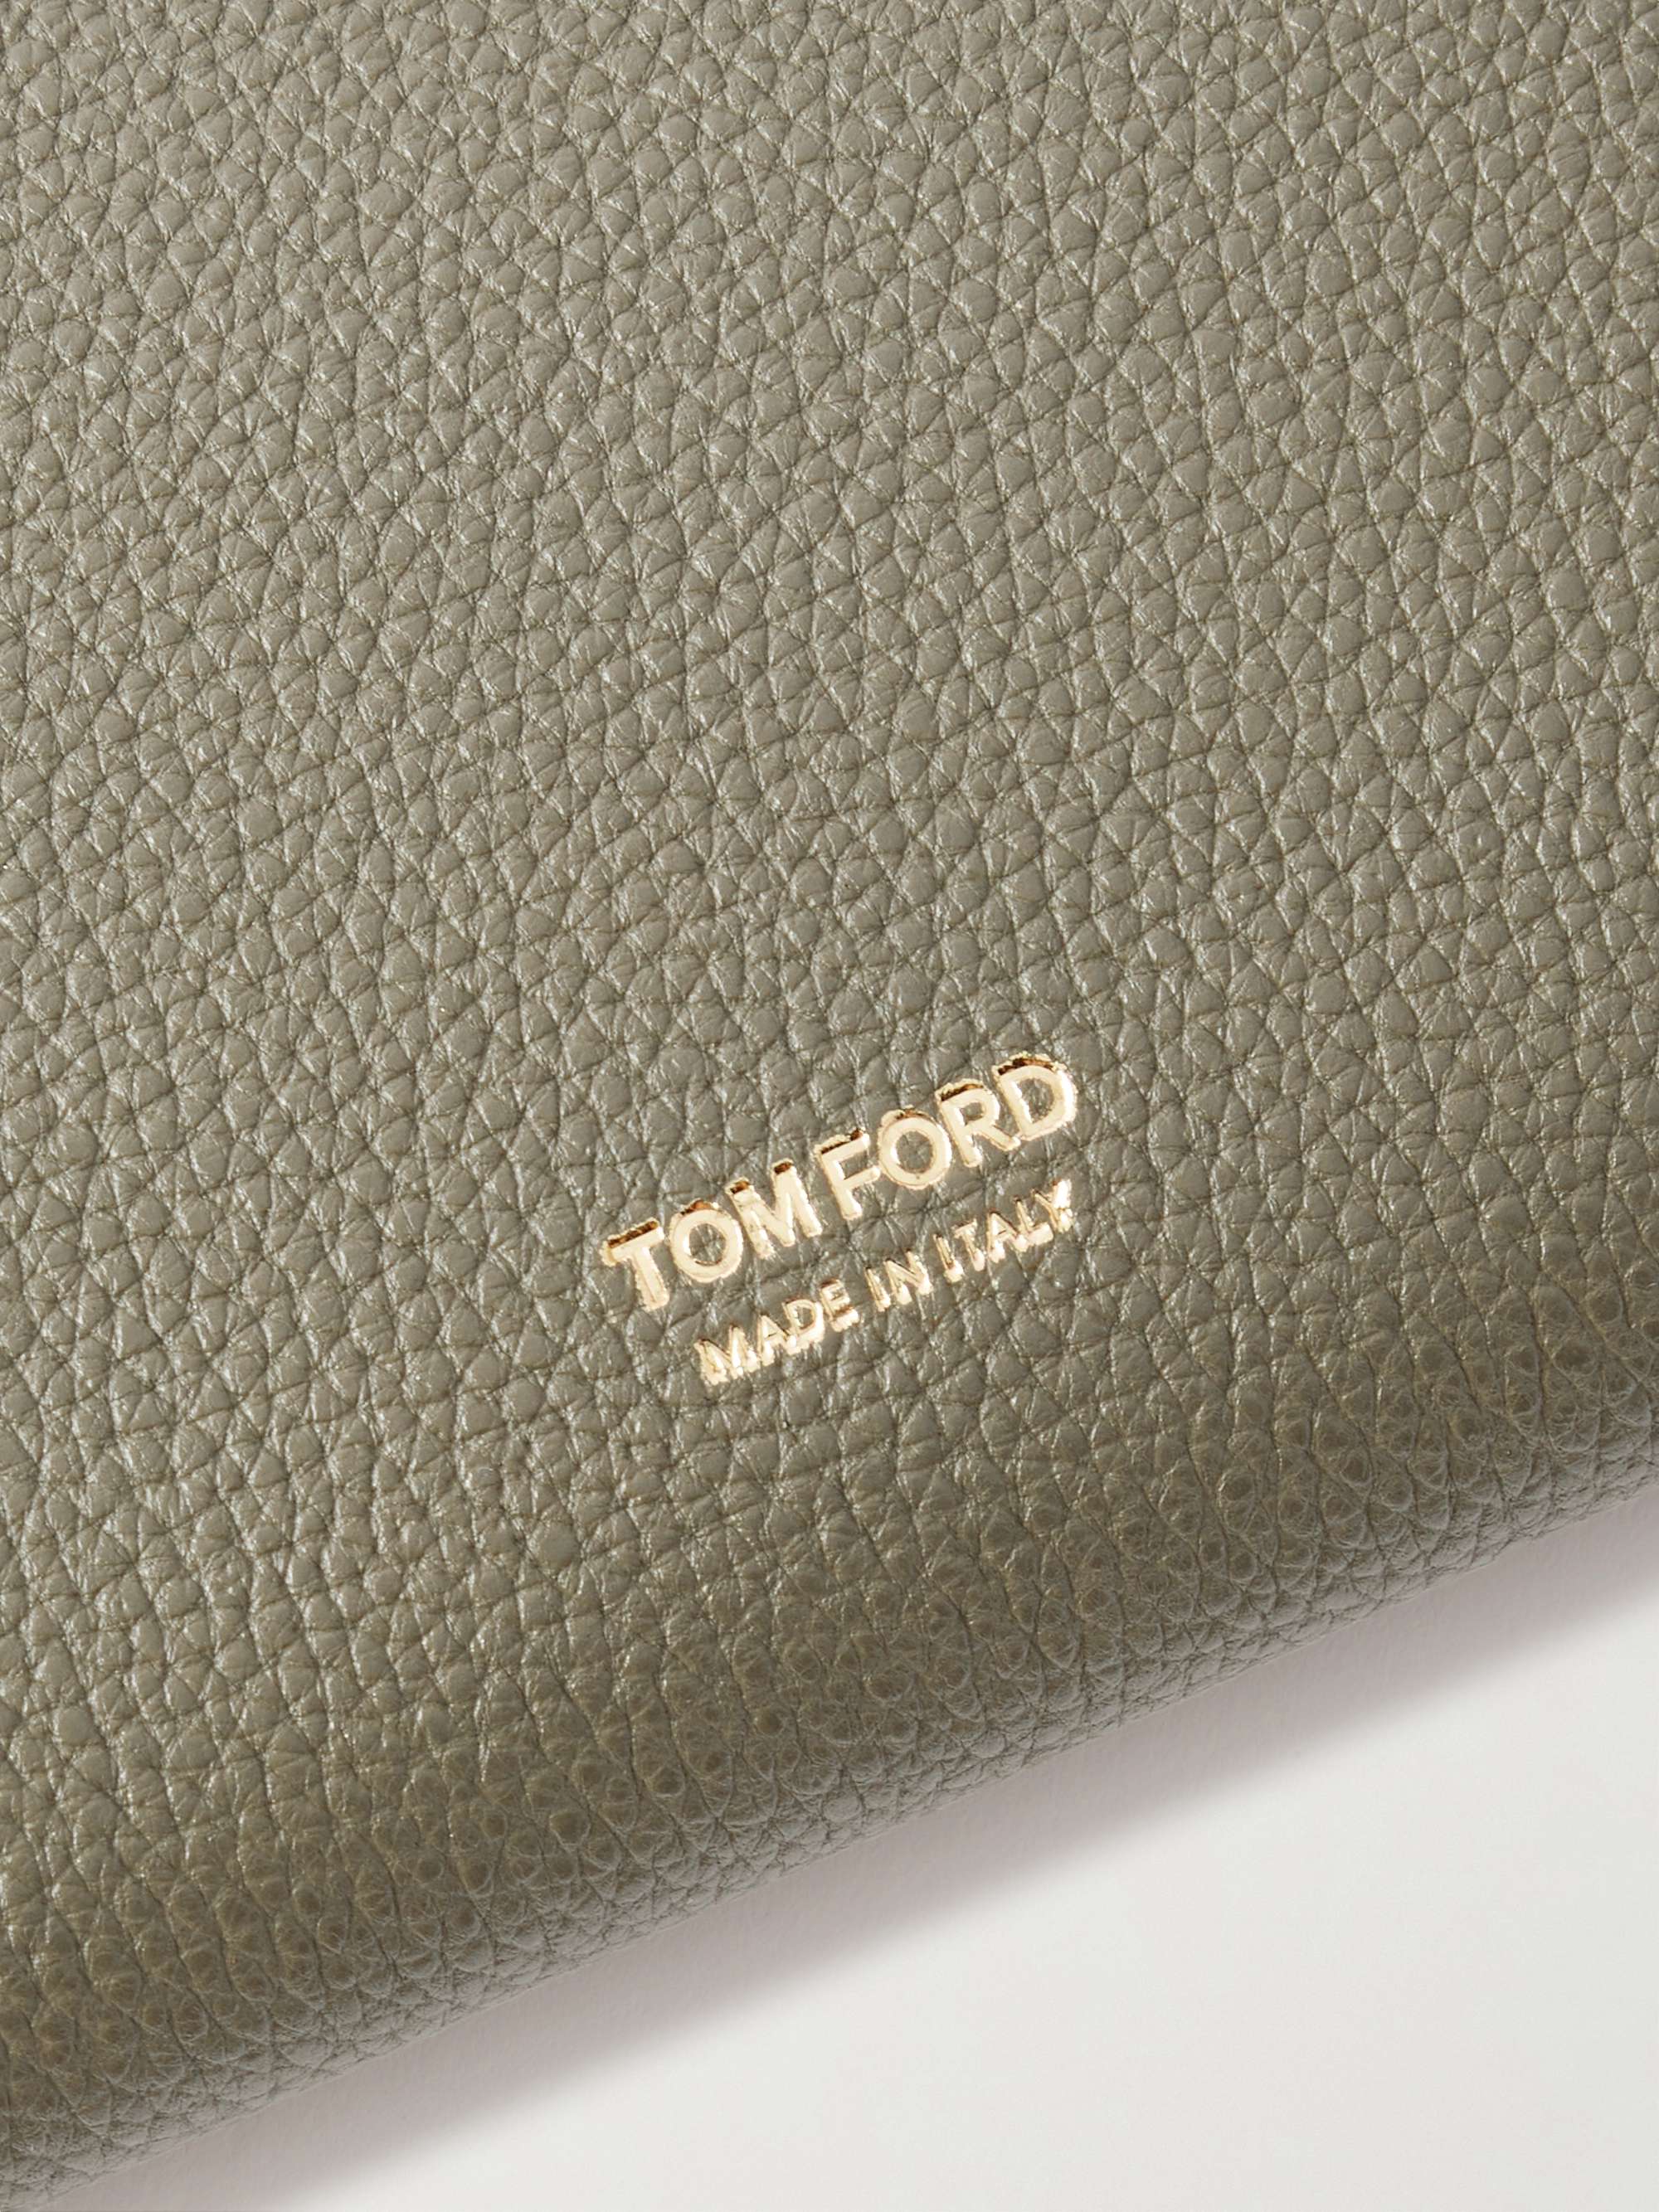 TOM FORD Full-Grain Leather Pouch